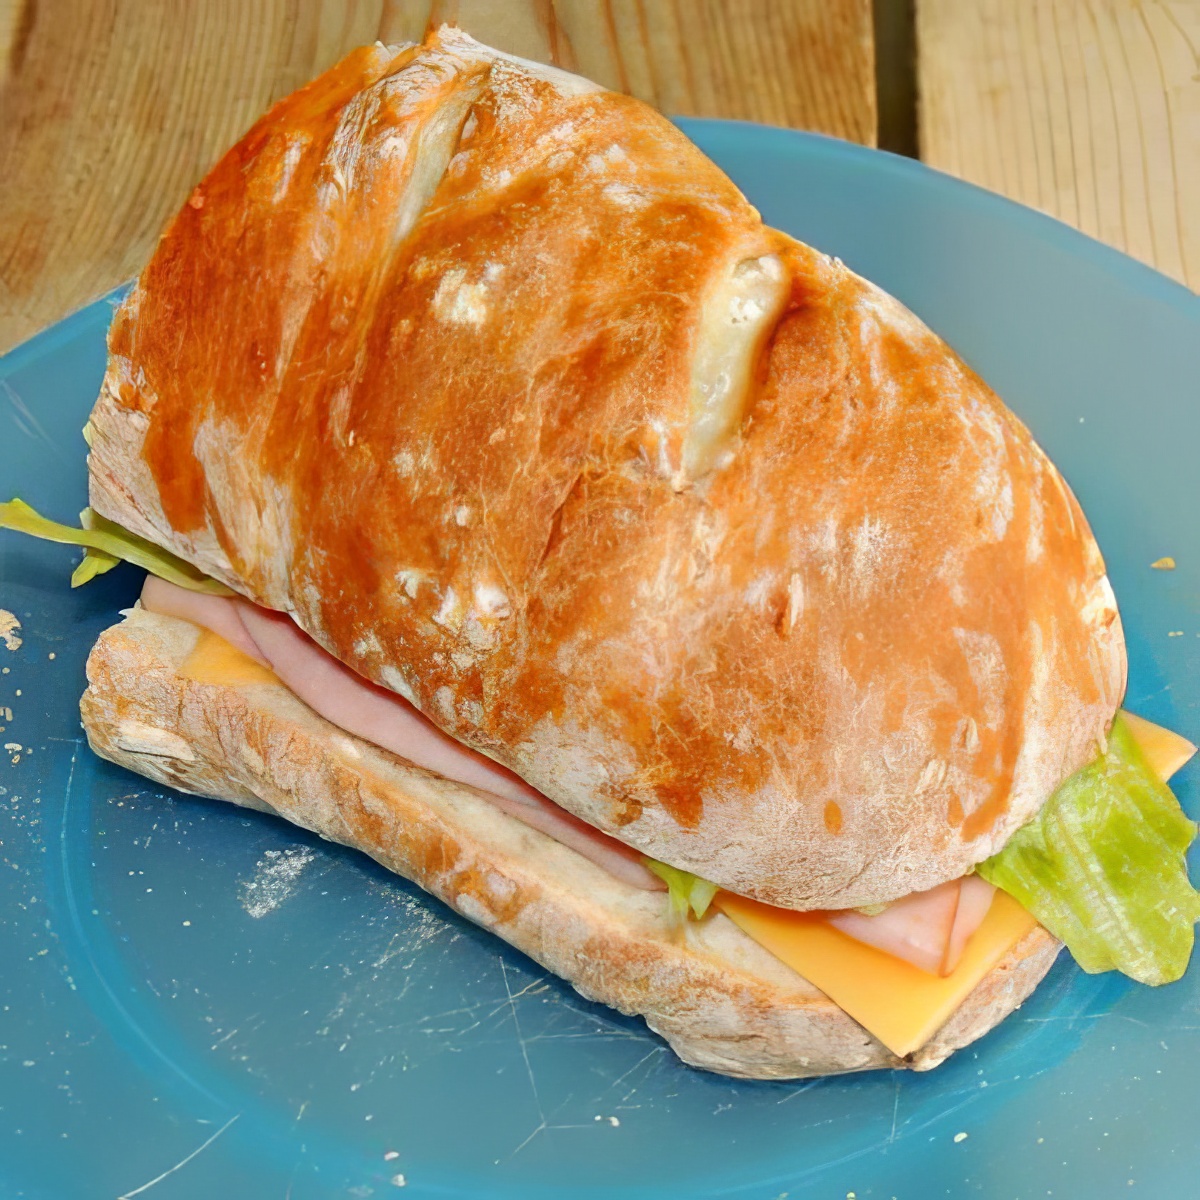 Let your kids try these overloaded sandwich bread for an afternoon snack. 